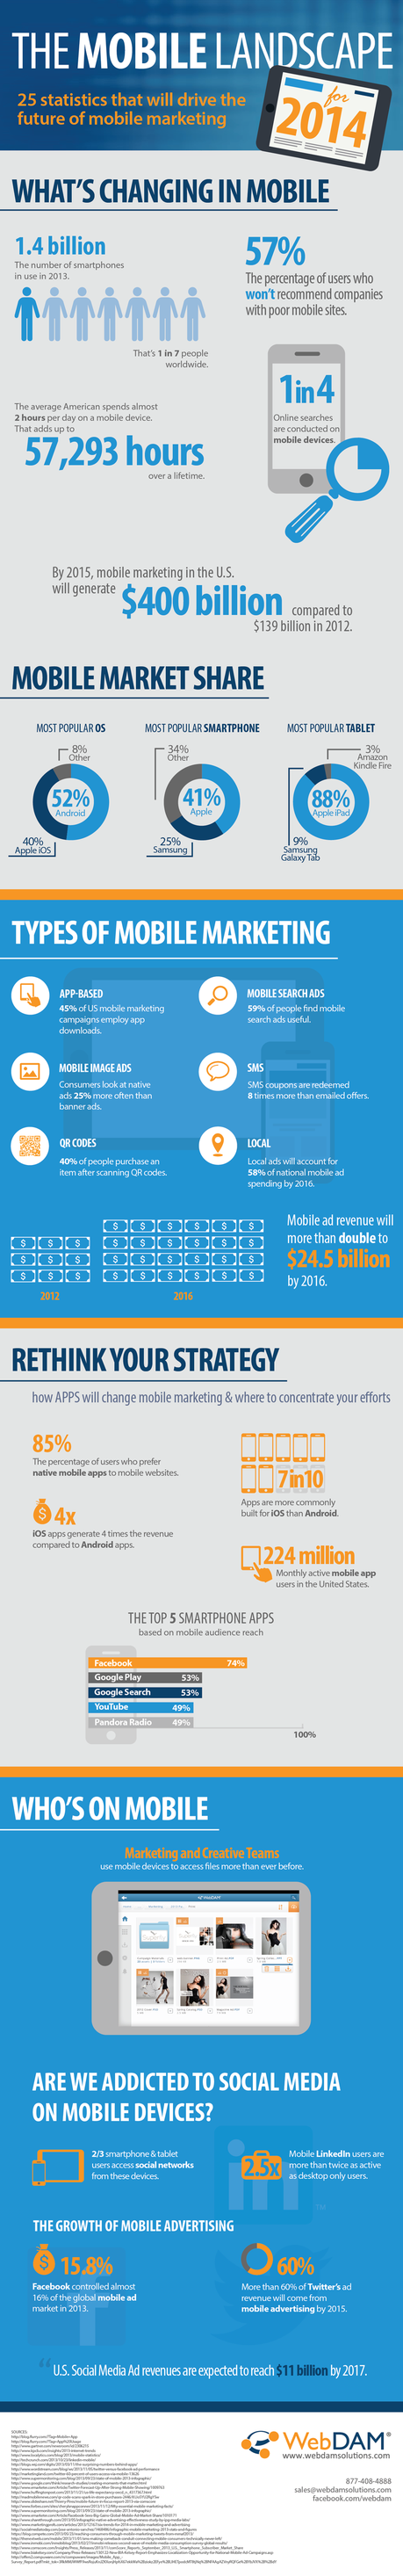 What’s changing for mobile marketing in 2014